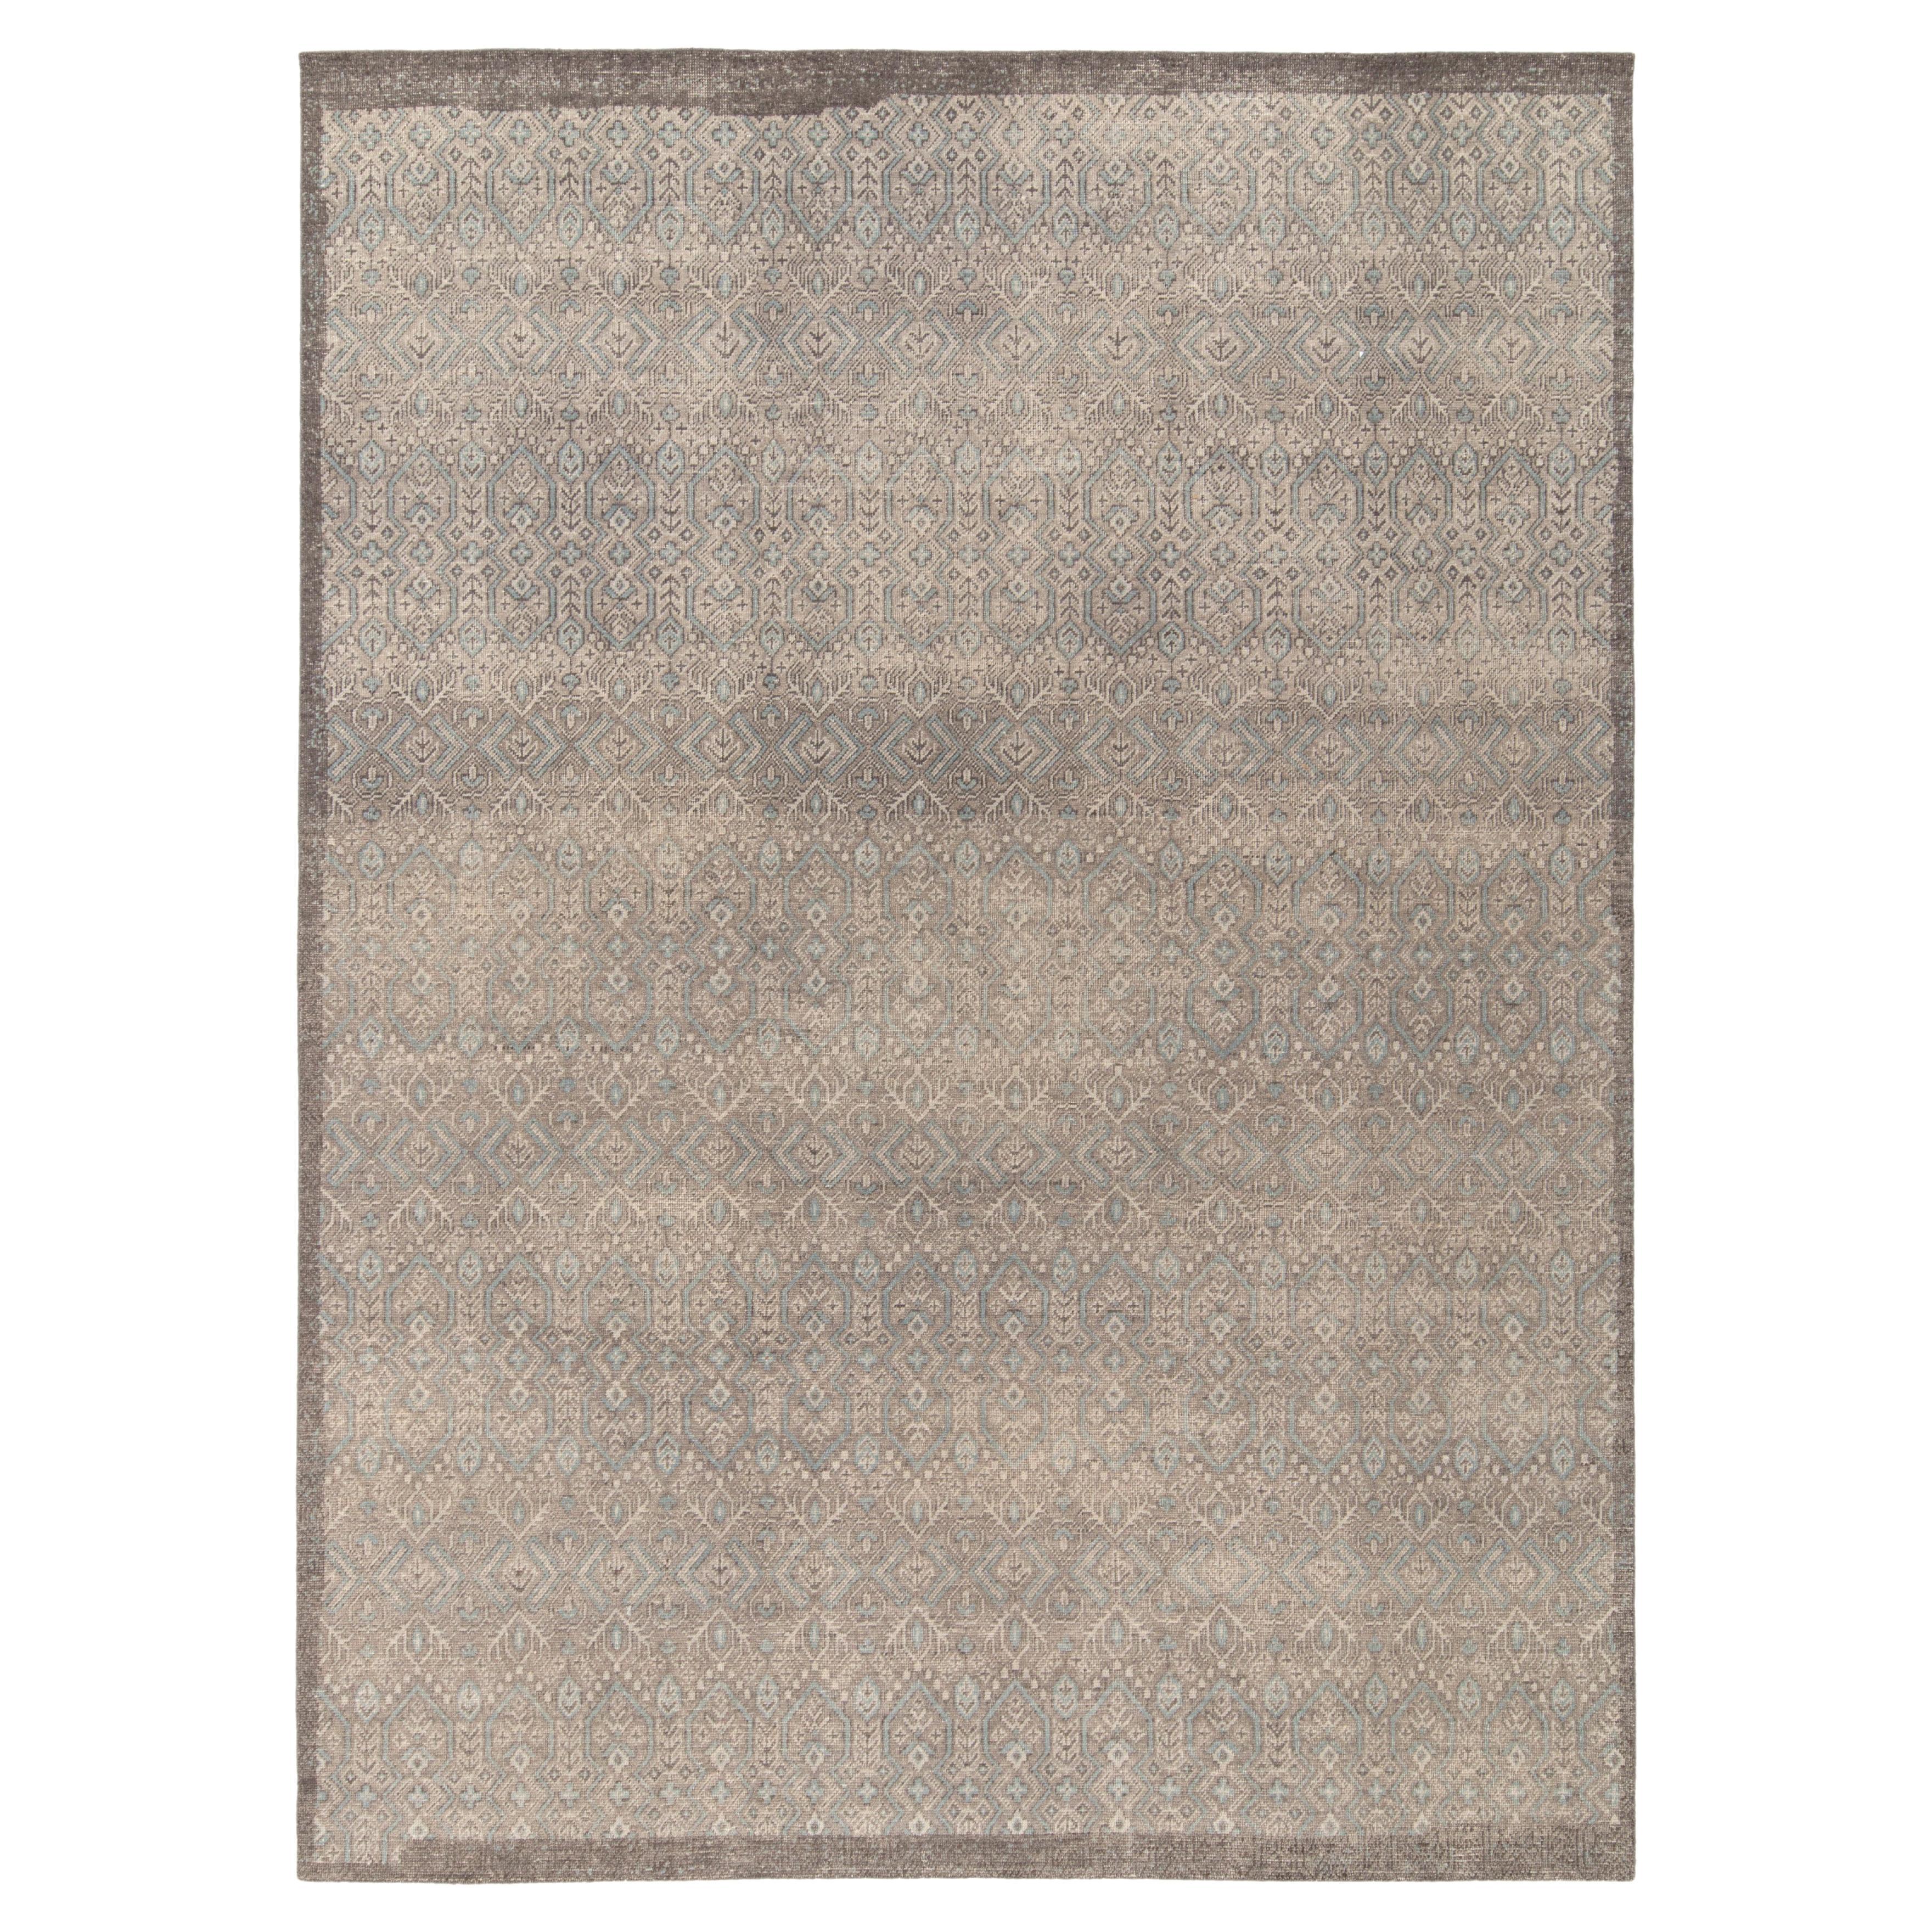 Rug & Kilim's Hand-Knotted Distressed Style Rug, Gray, Blue Geometric Pattern For Sale